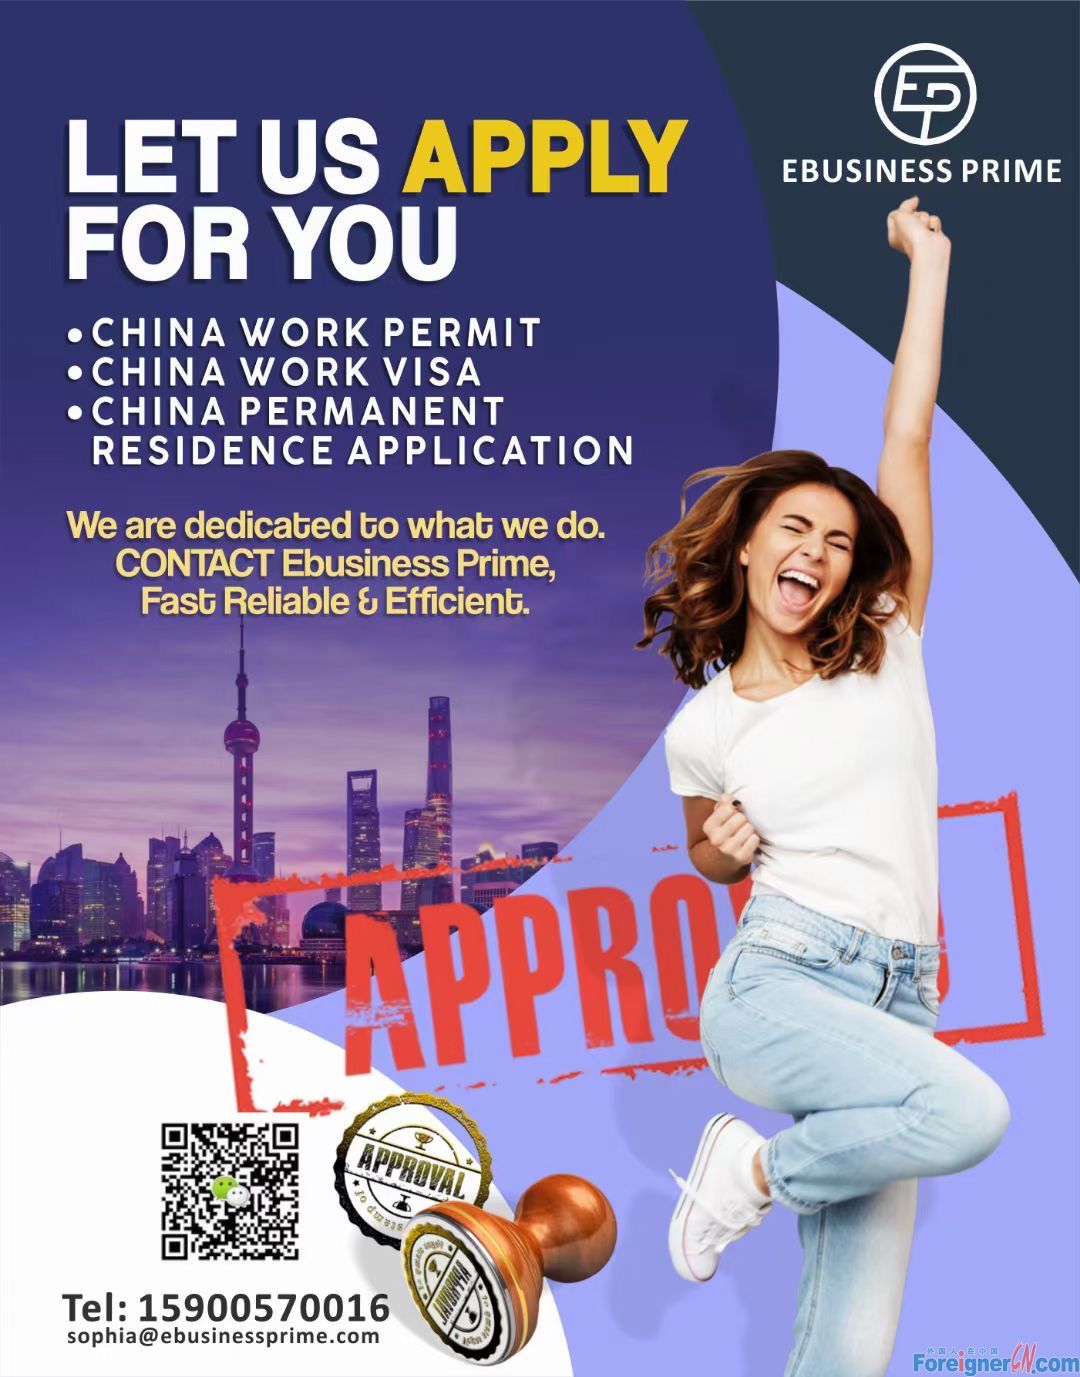 China work visa (Z visa) - Foreigner’s Work Permit (FWP) and Residence Permit service